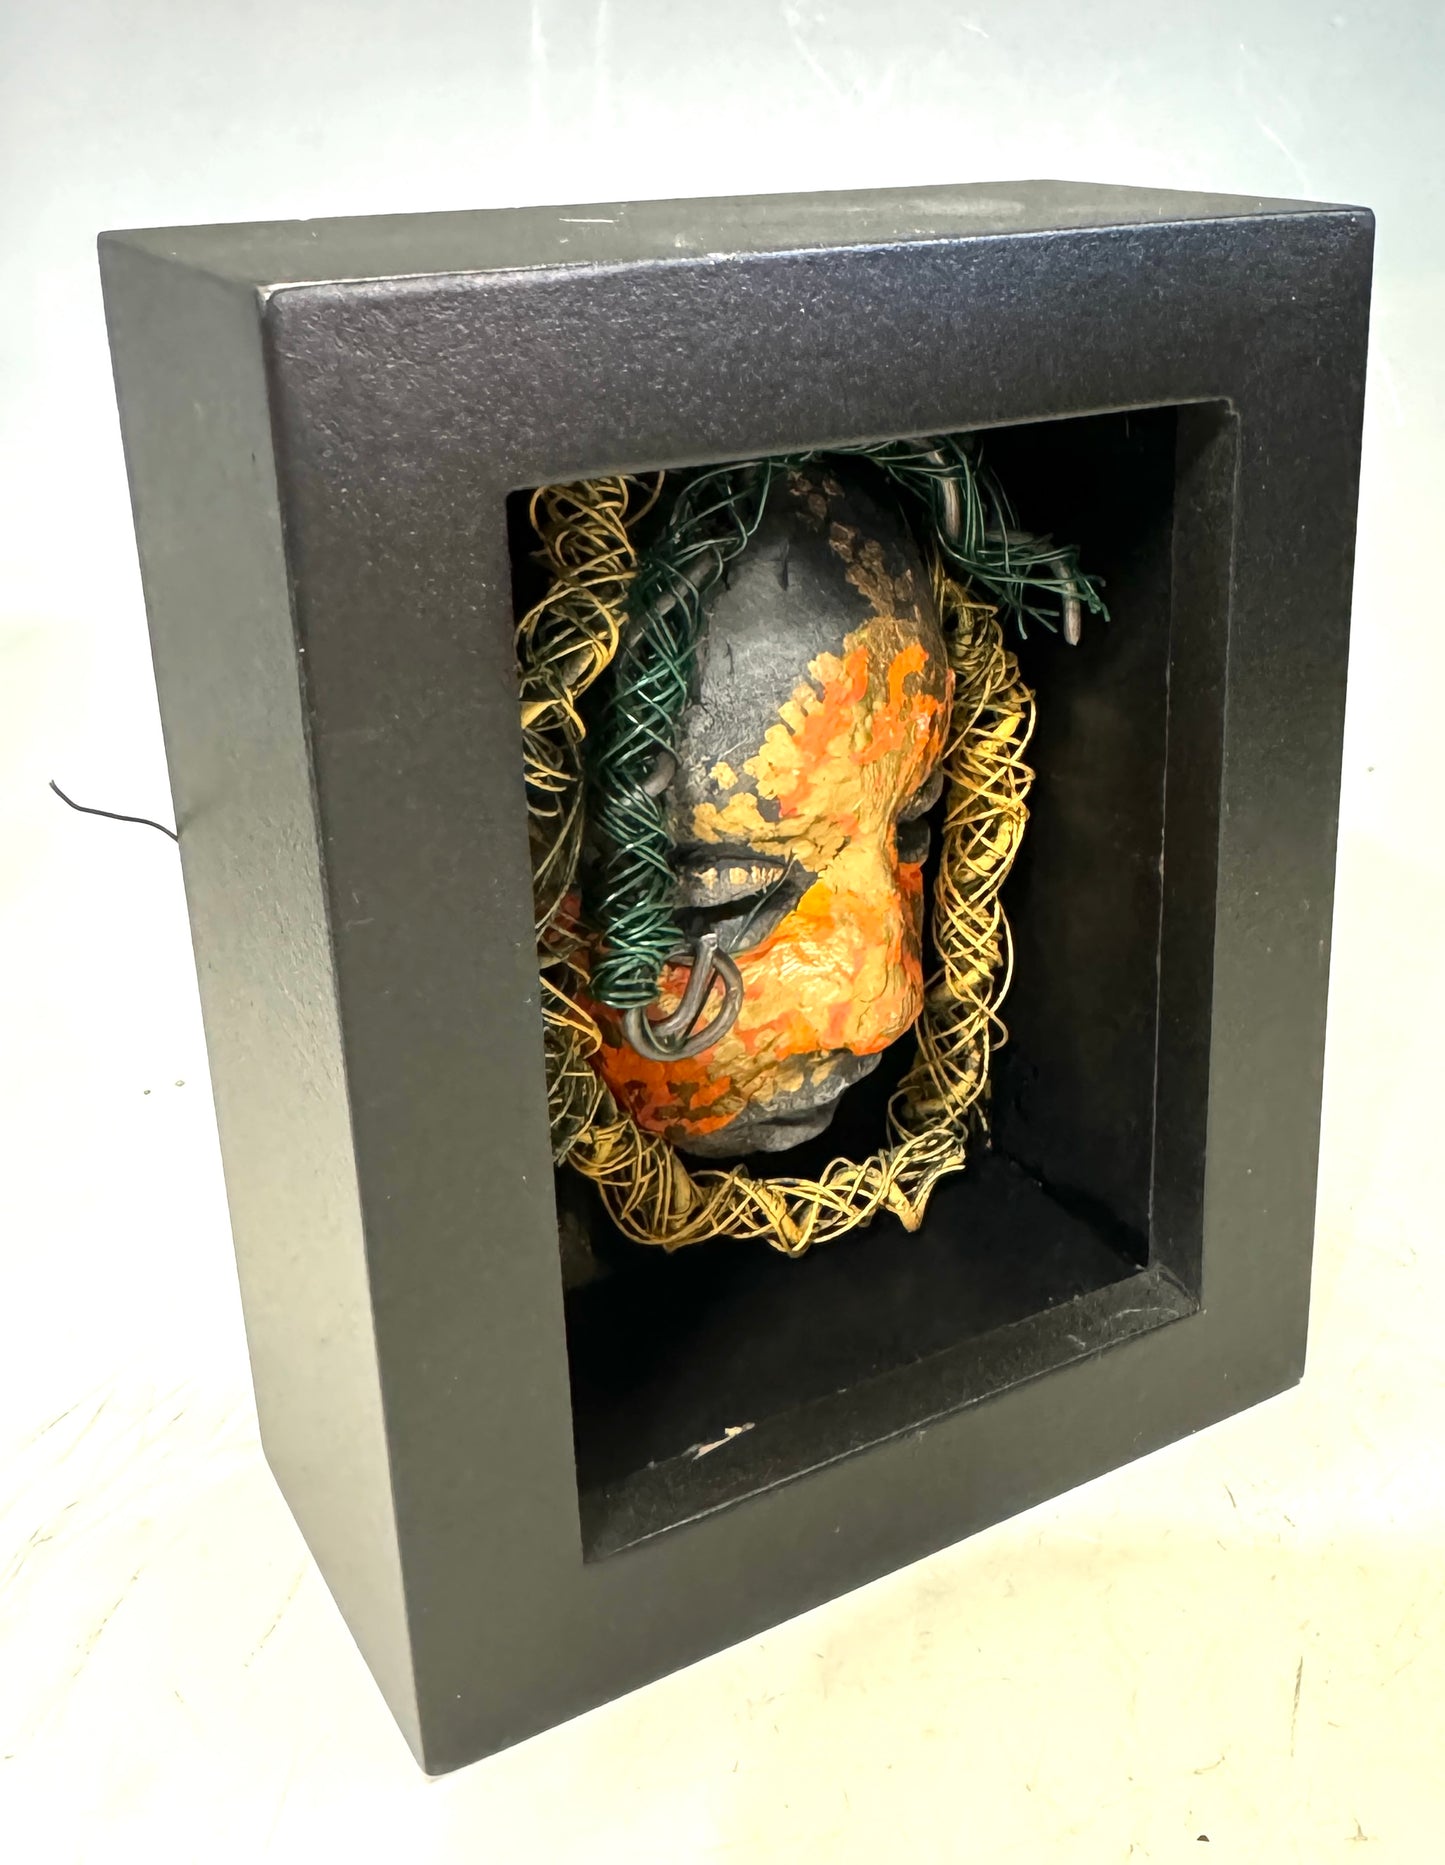 Jake is a mixed media mask that is raku fired and enclosed in a 4“ x 4“ black shadowbox. He has over 25 feet of 16 and 24 gauge wire as hair. 